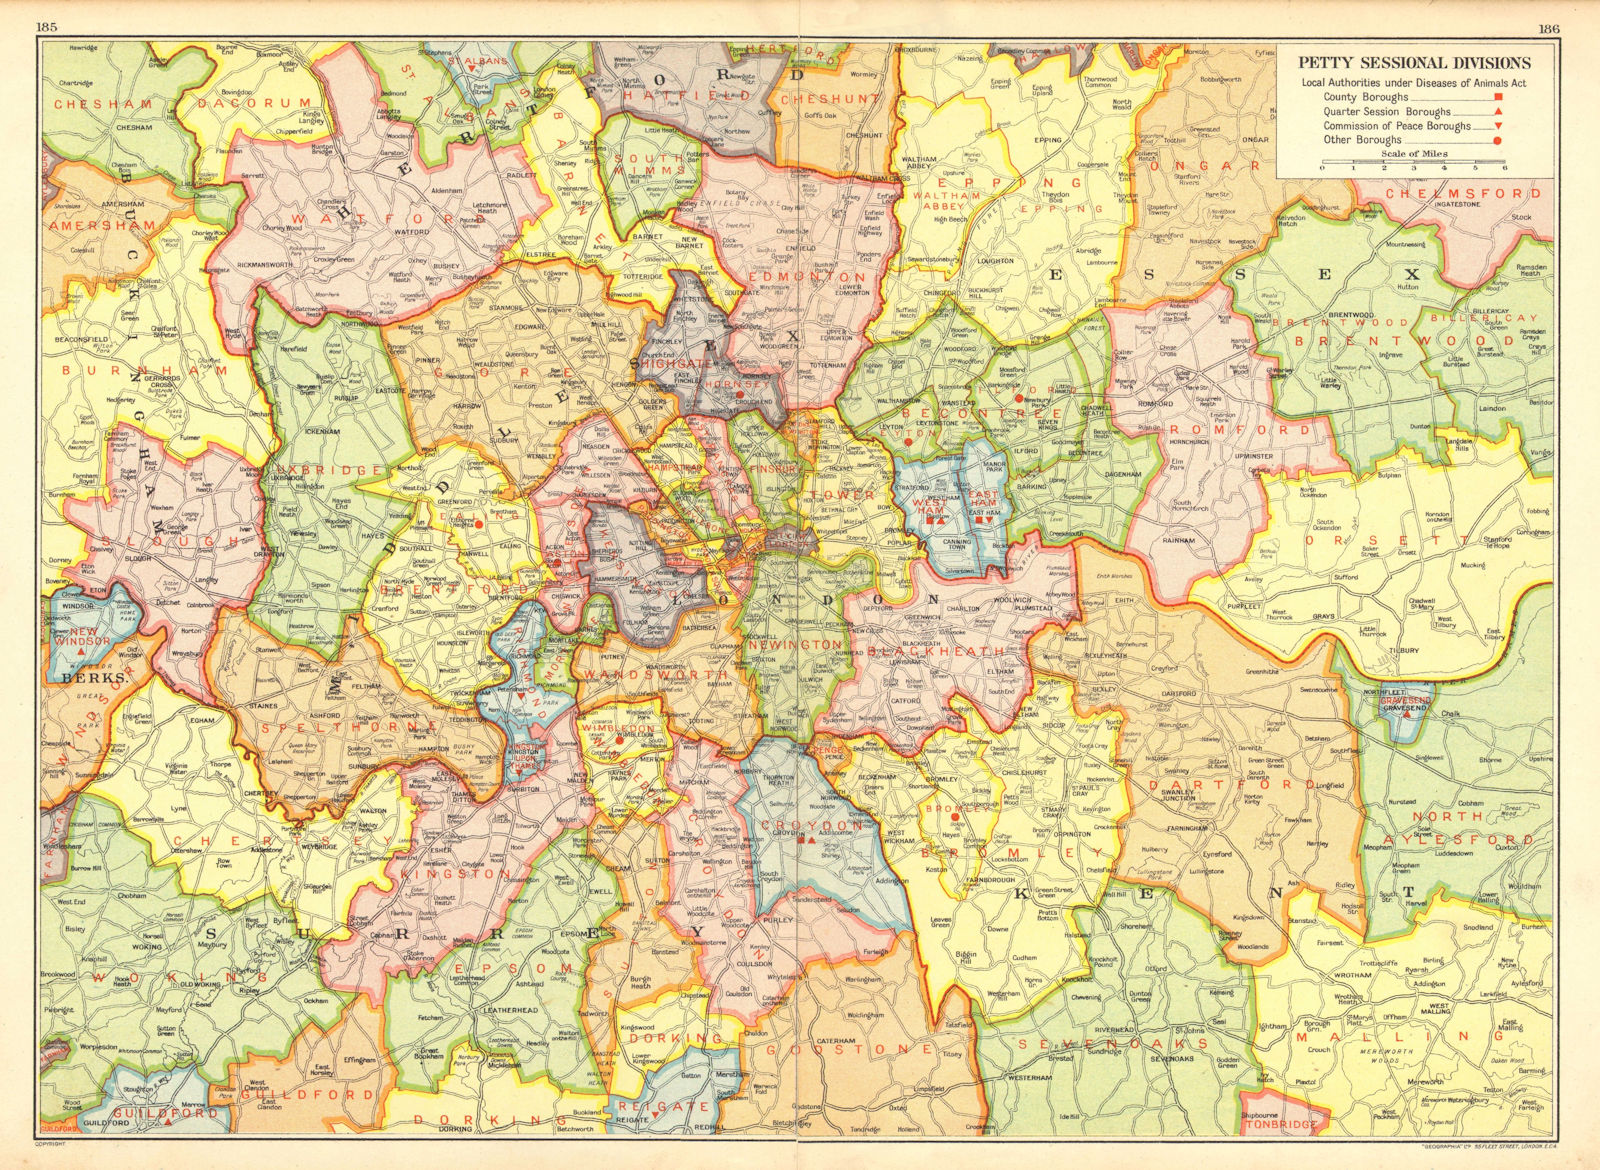 LONDON. Petty Sessional Divisions. Quarter Session boroughs 1937 old map